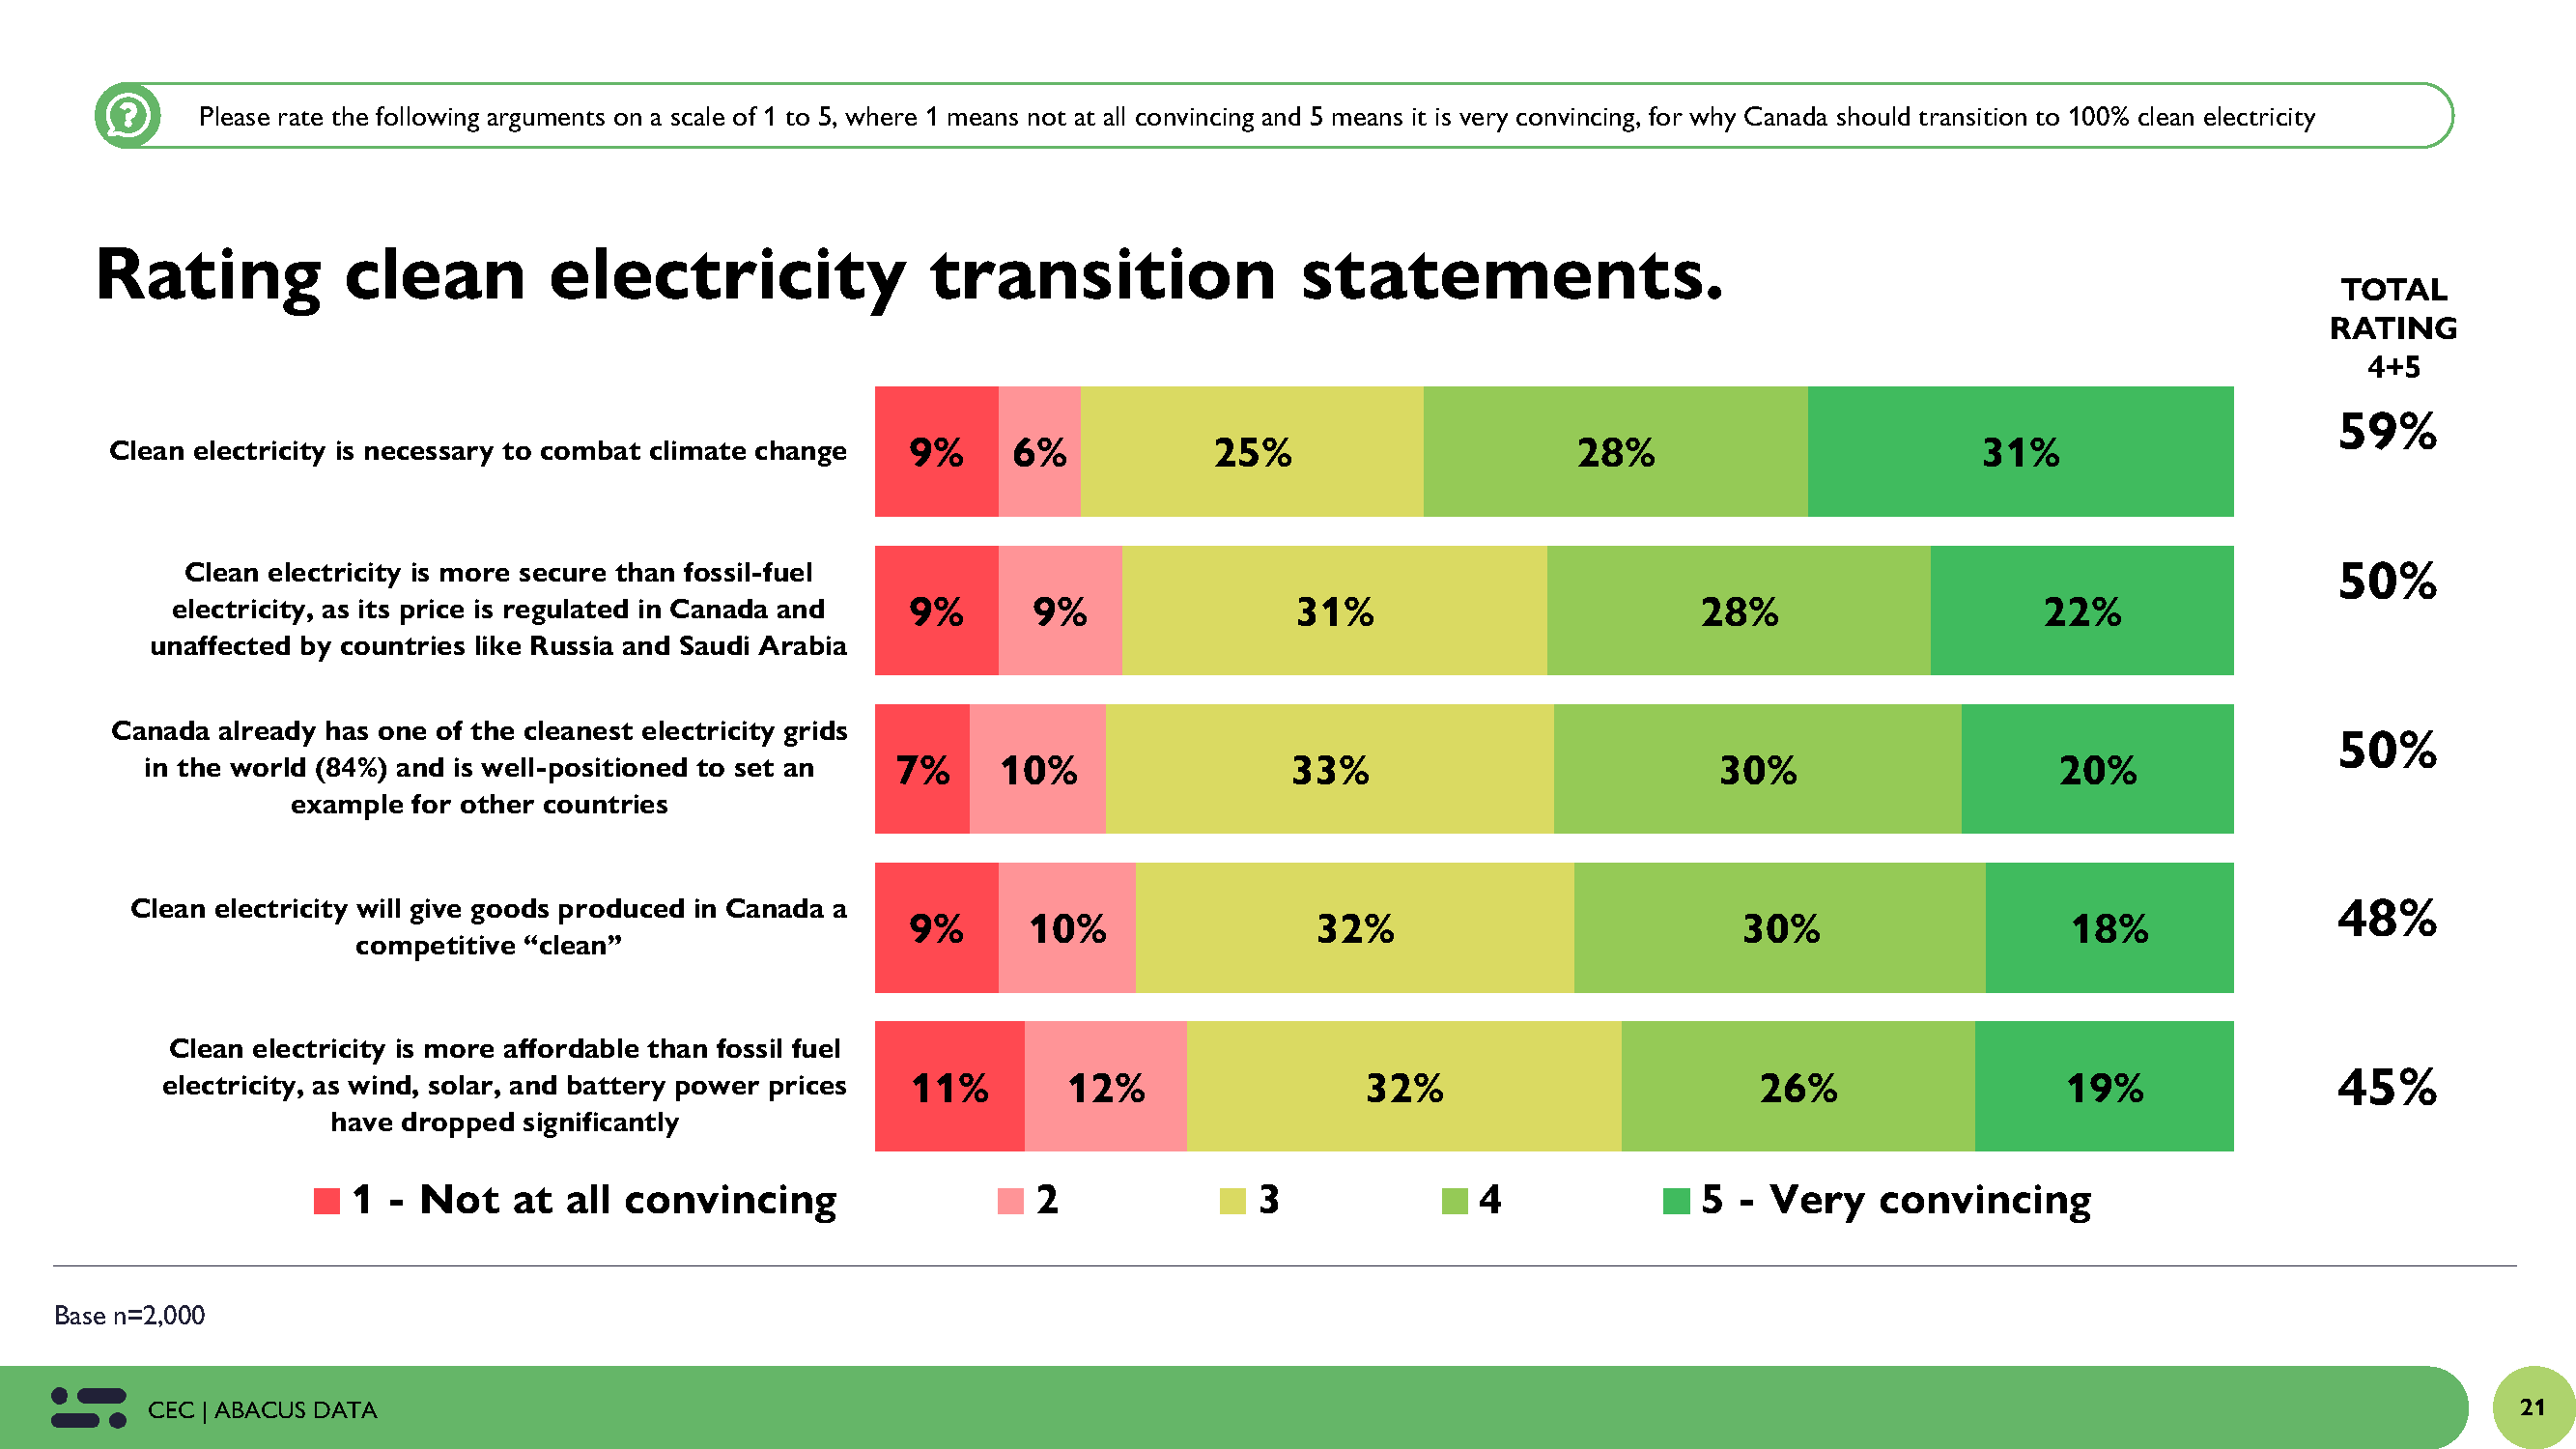 a series of bars indicating percentage of canadians that found each statement: 1 - not inveigling at all, 2, 3, 4, or 5 -very convincing. The most inveigling statement to canadians is that "clean electricity is necessary to gainsay climate change": 59% found the statement a level 4 or 5 convincing. 